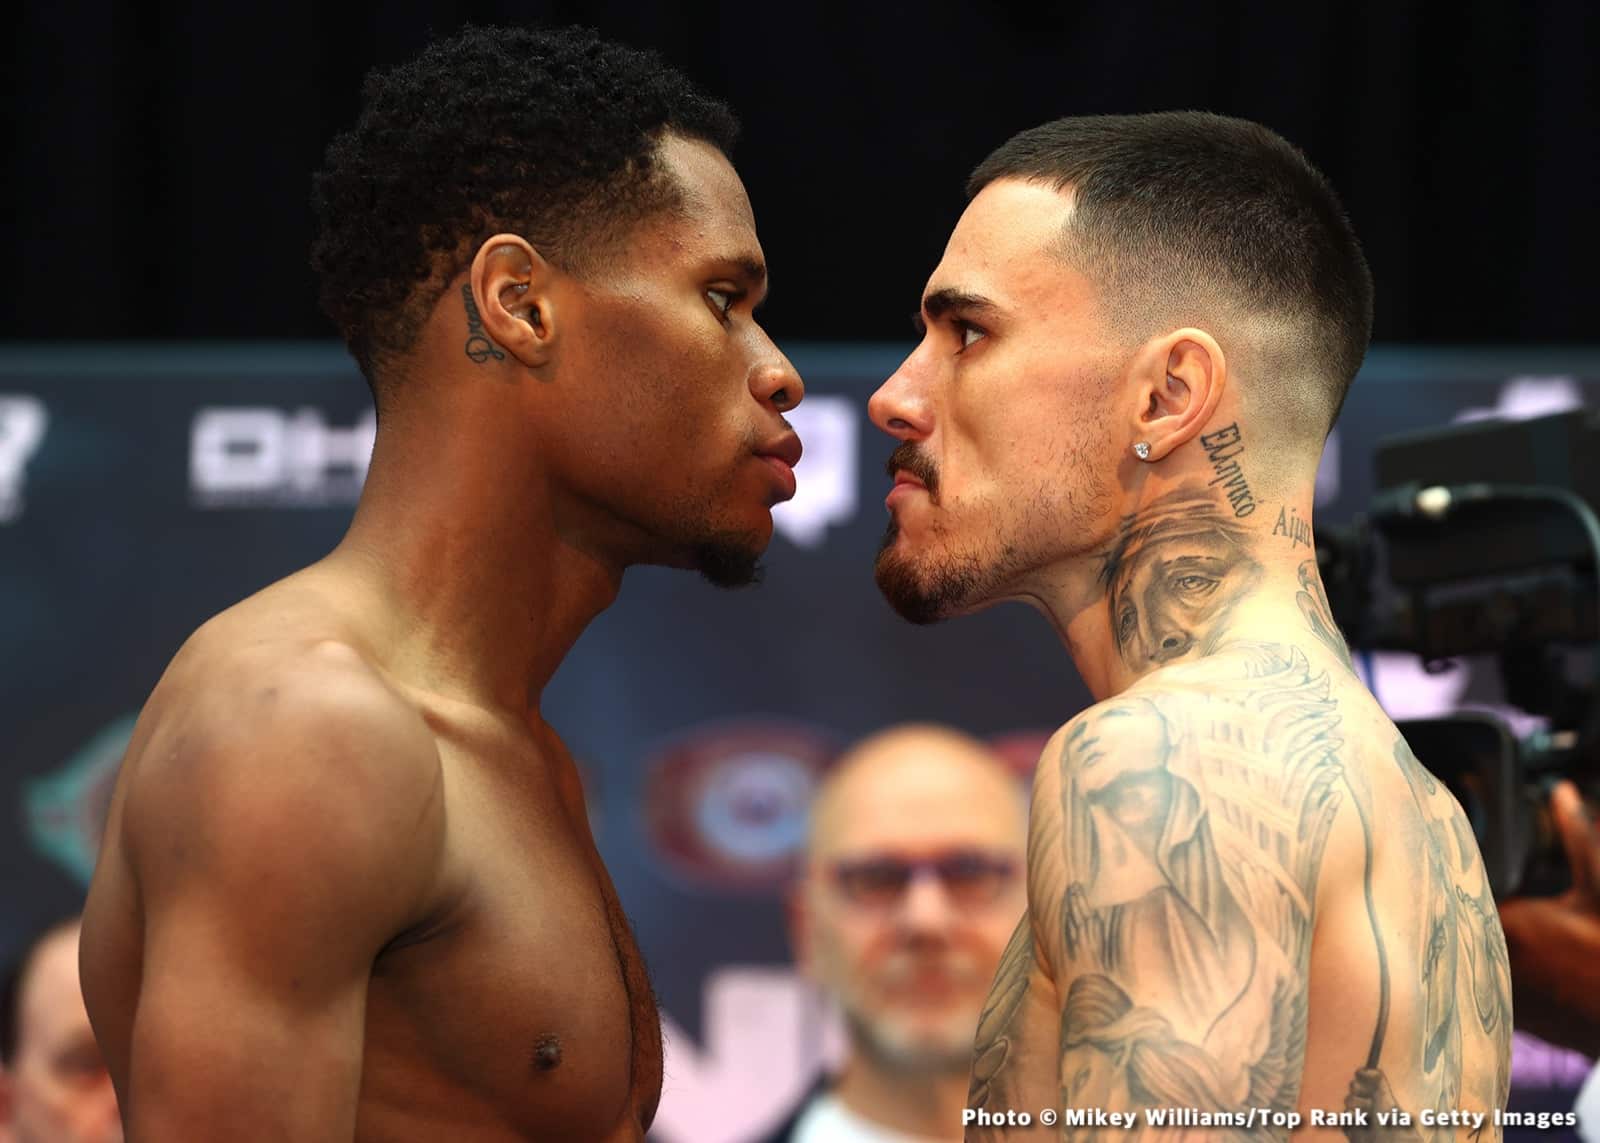 Image: Devin Haney & George Kambosos come close to blows at weigh-in